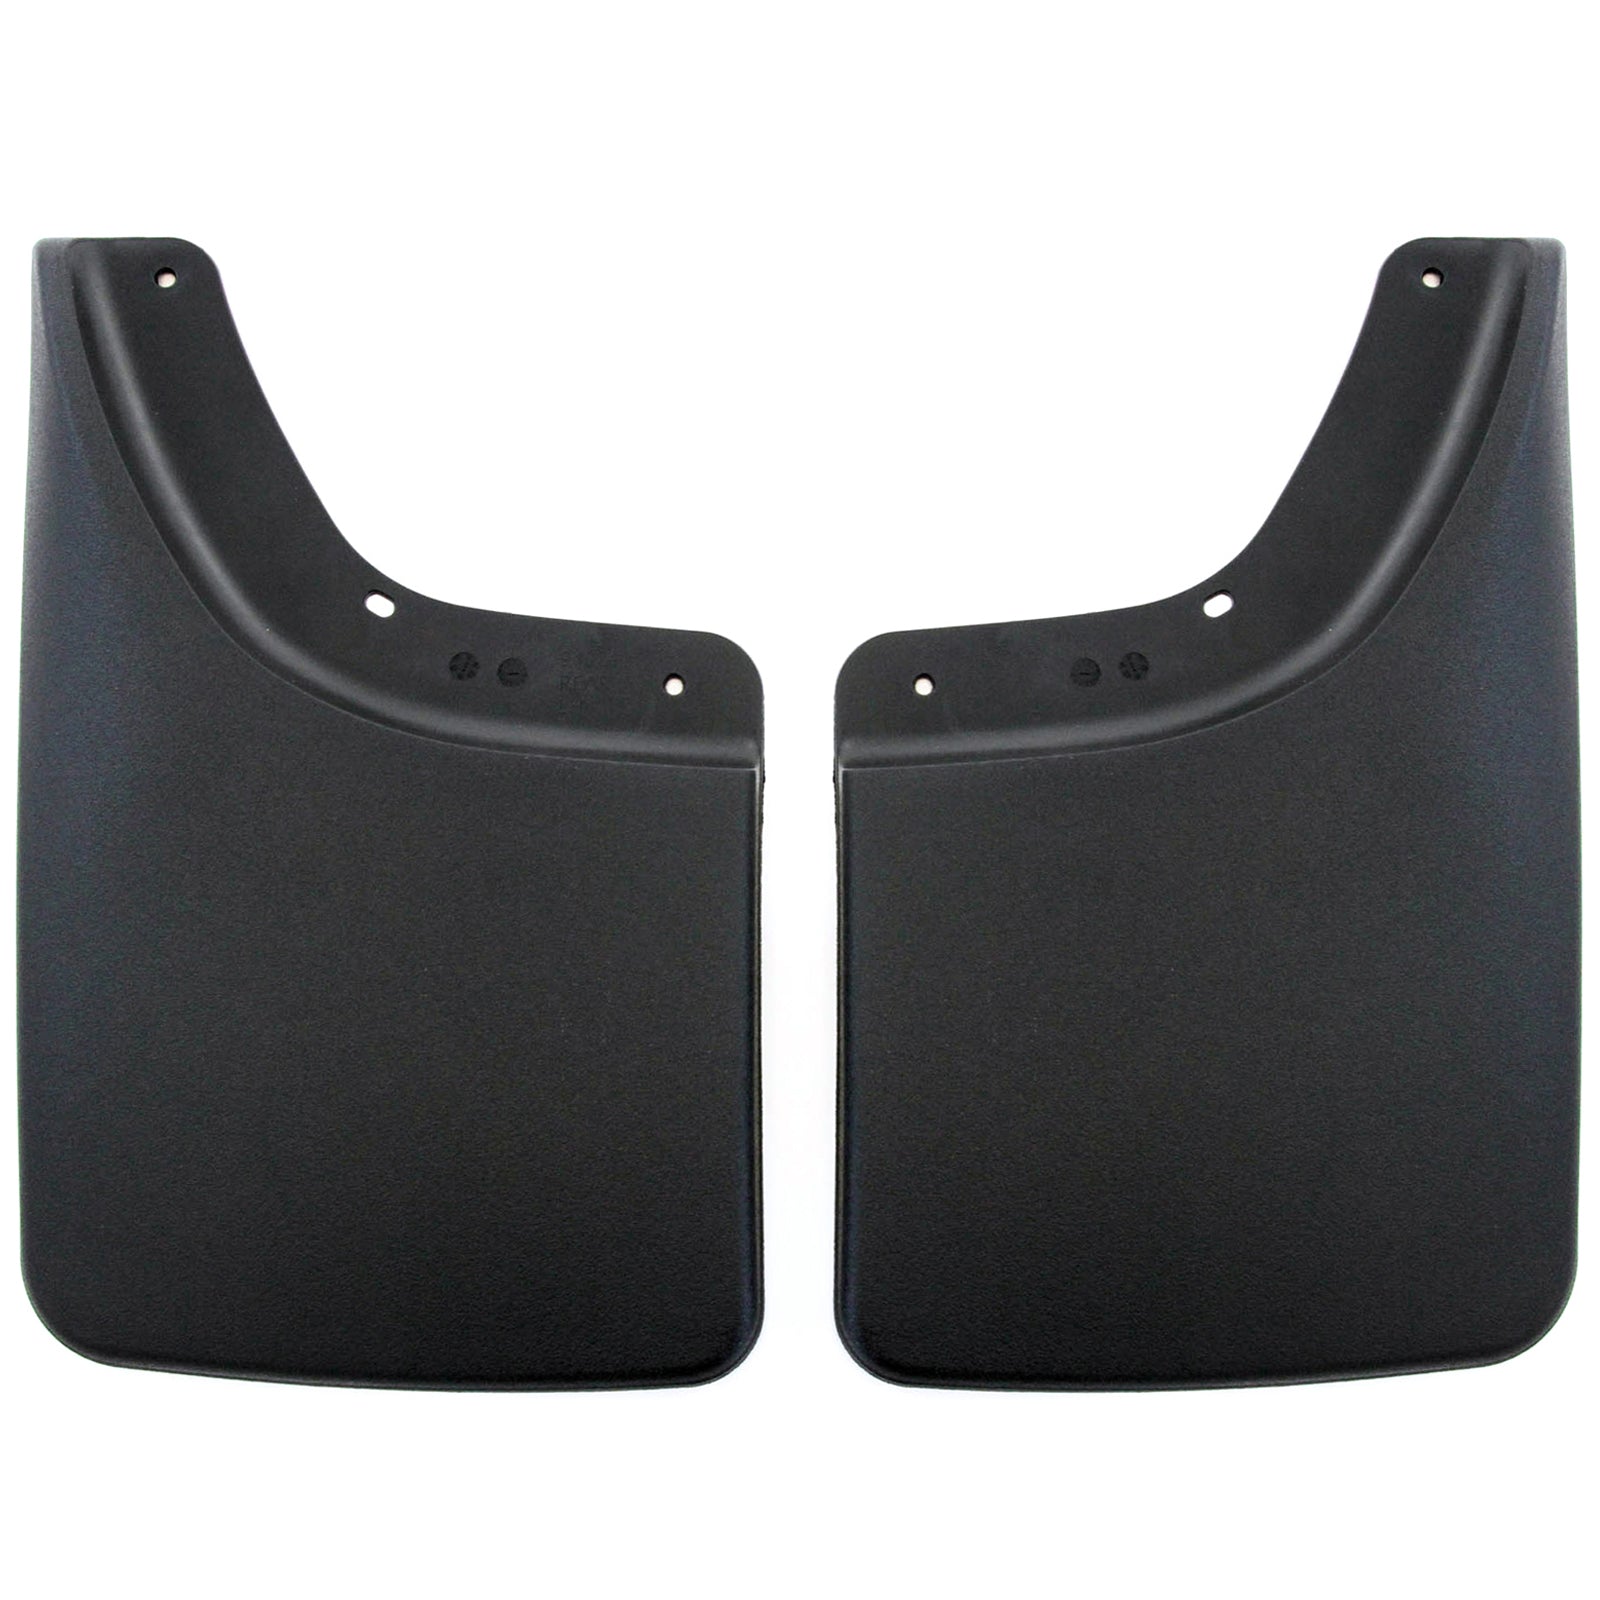 Red Hound Auto 2002-2008 Compatible with Dodge Ram 1500 Mud Flaps Guards Splash No Flares Rear Molded 2pc Set